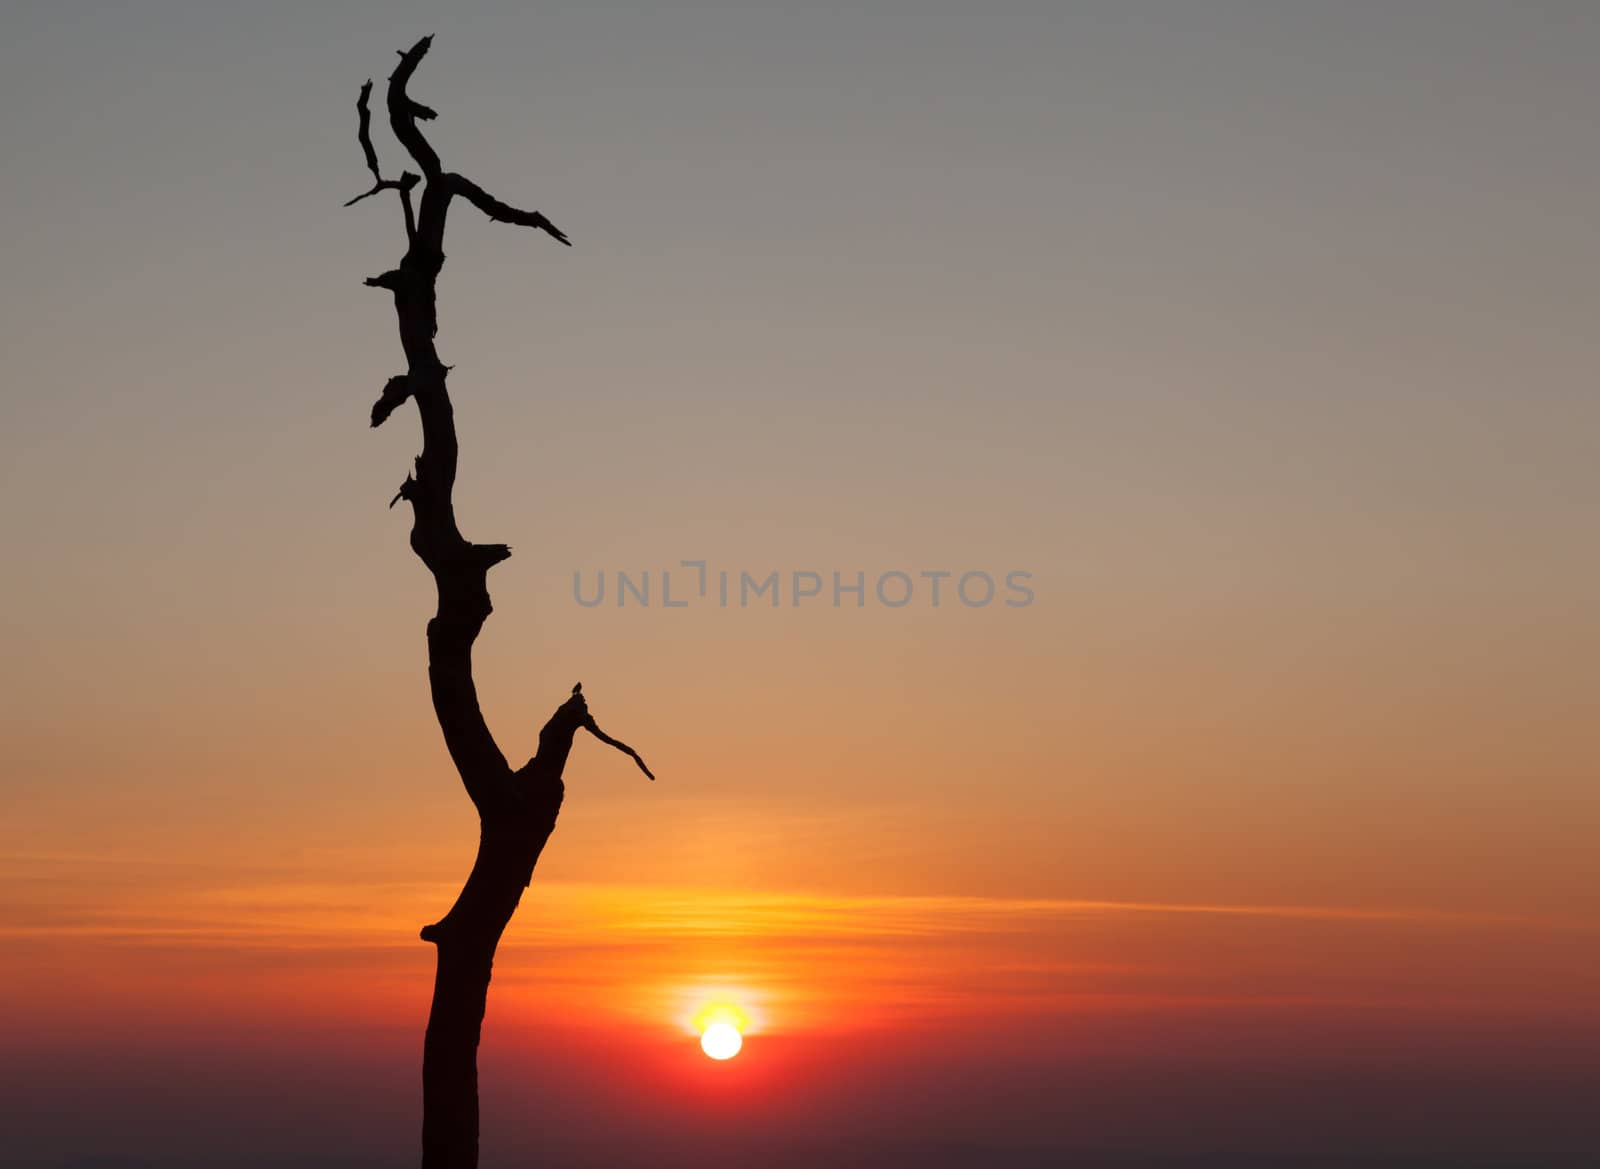 Gnarled tree on Skyline drive in Virginia by steheap